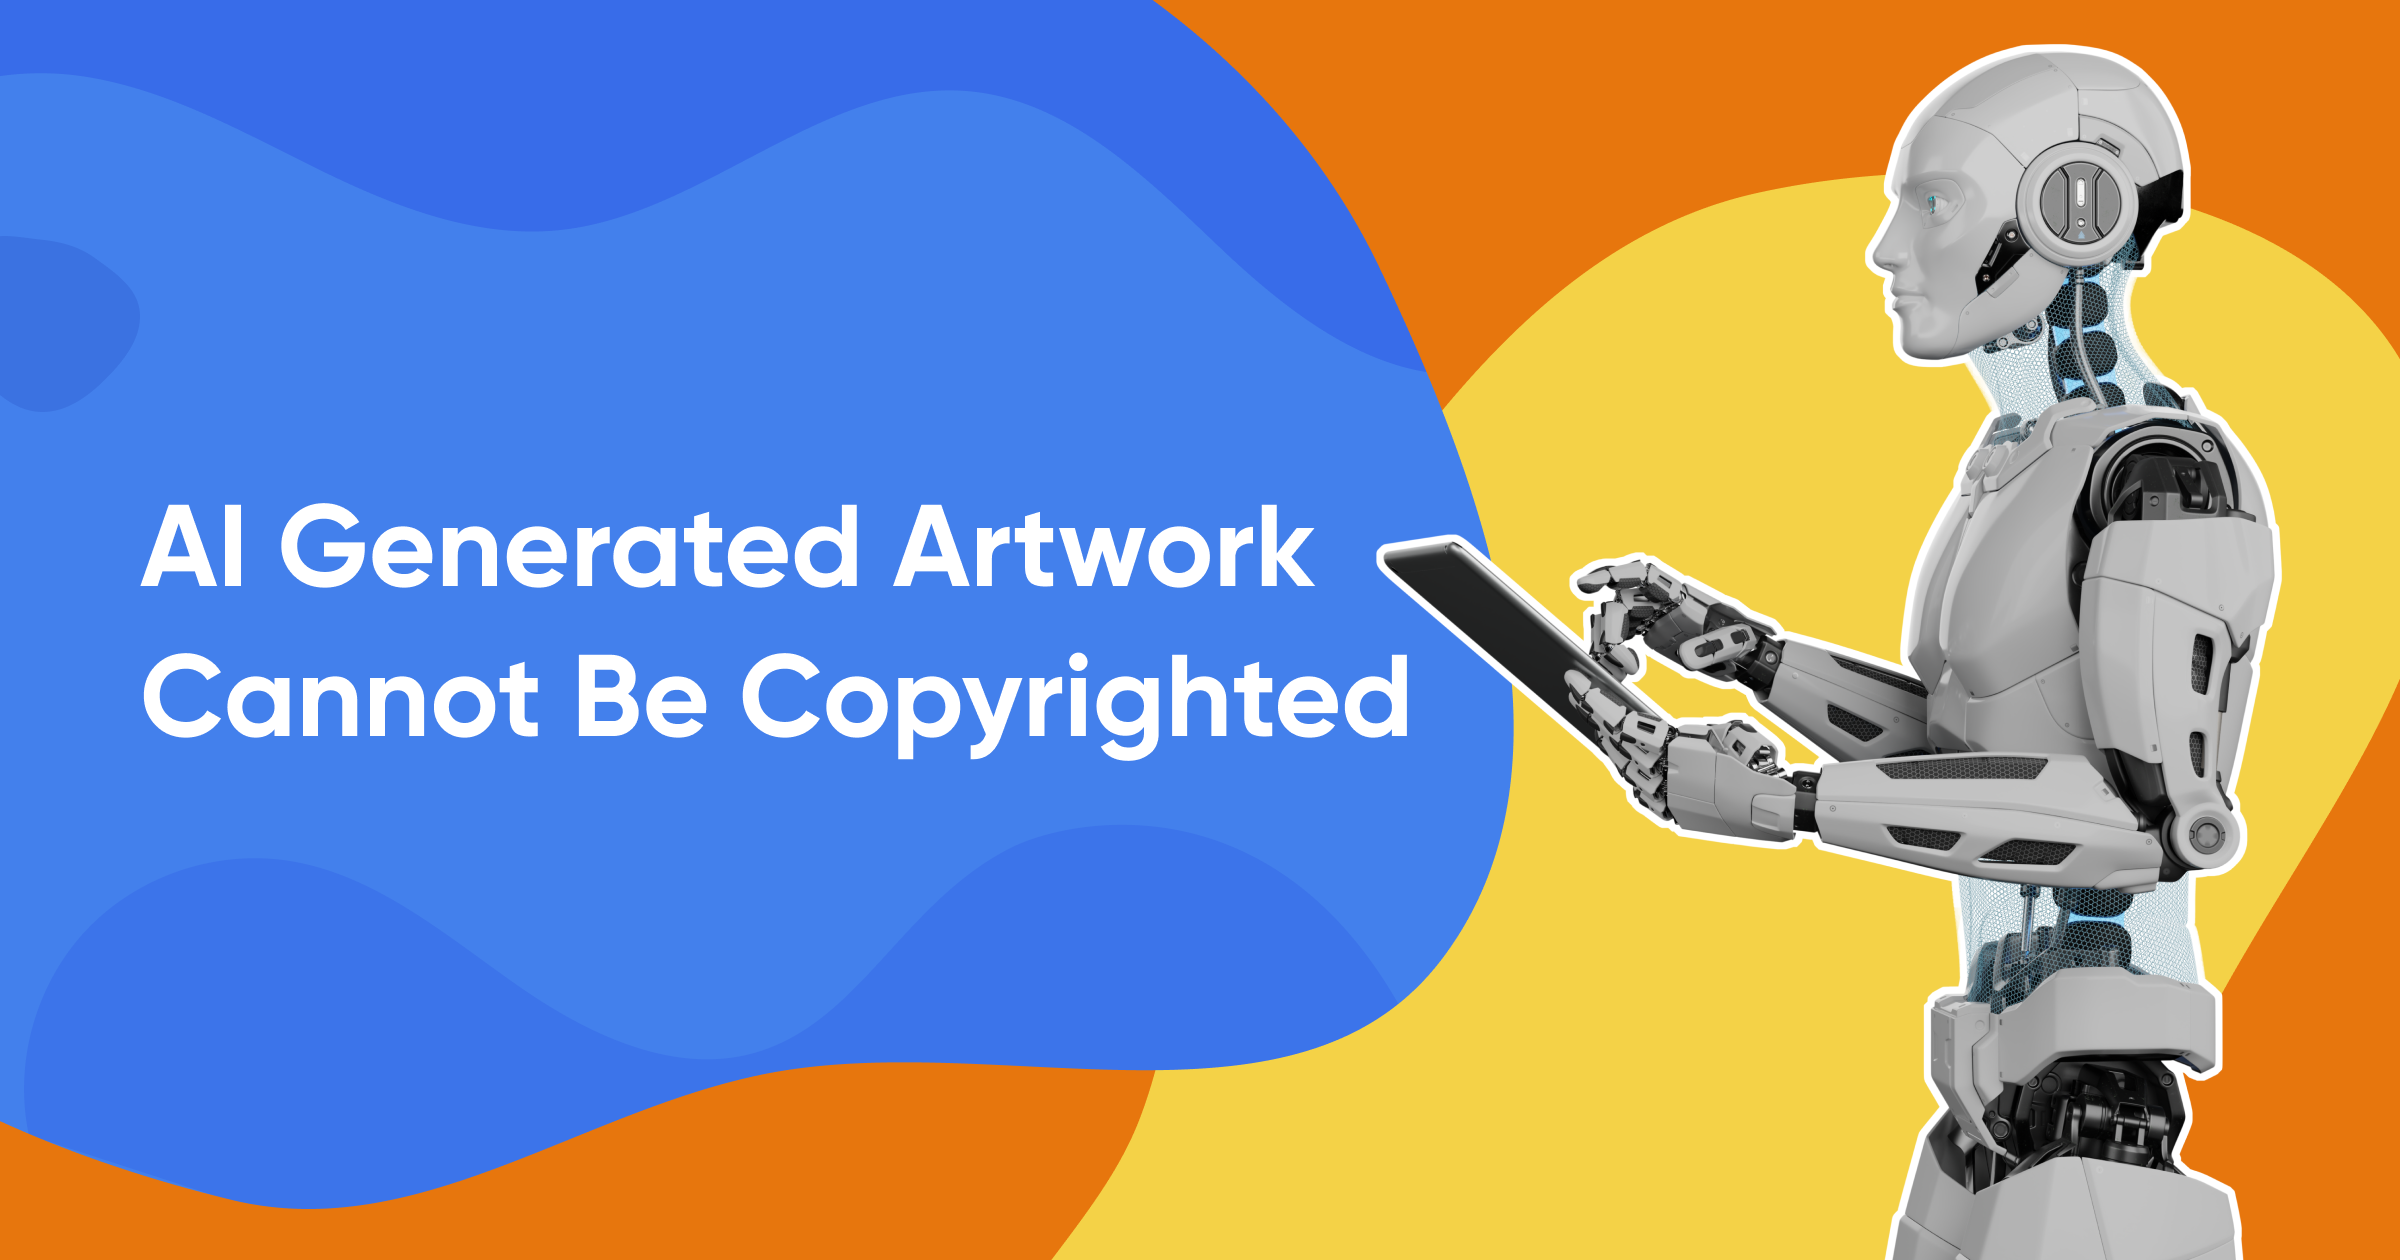  AI-generated artwork can’t be copyrighted